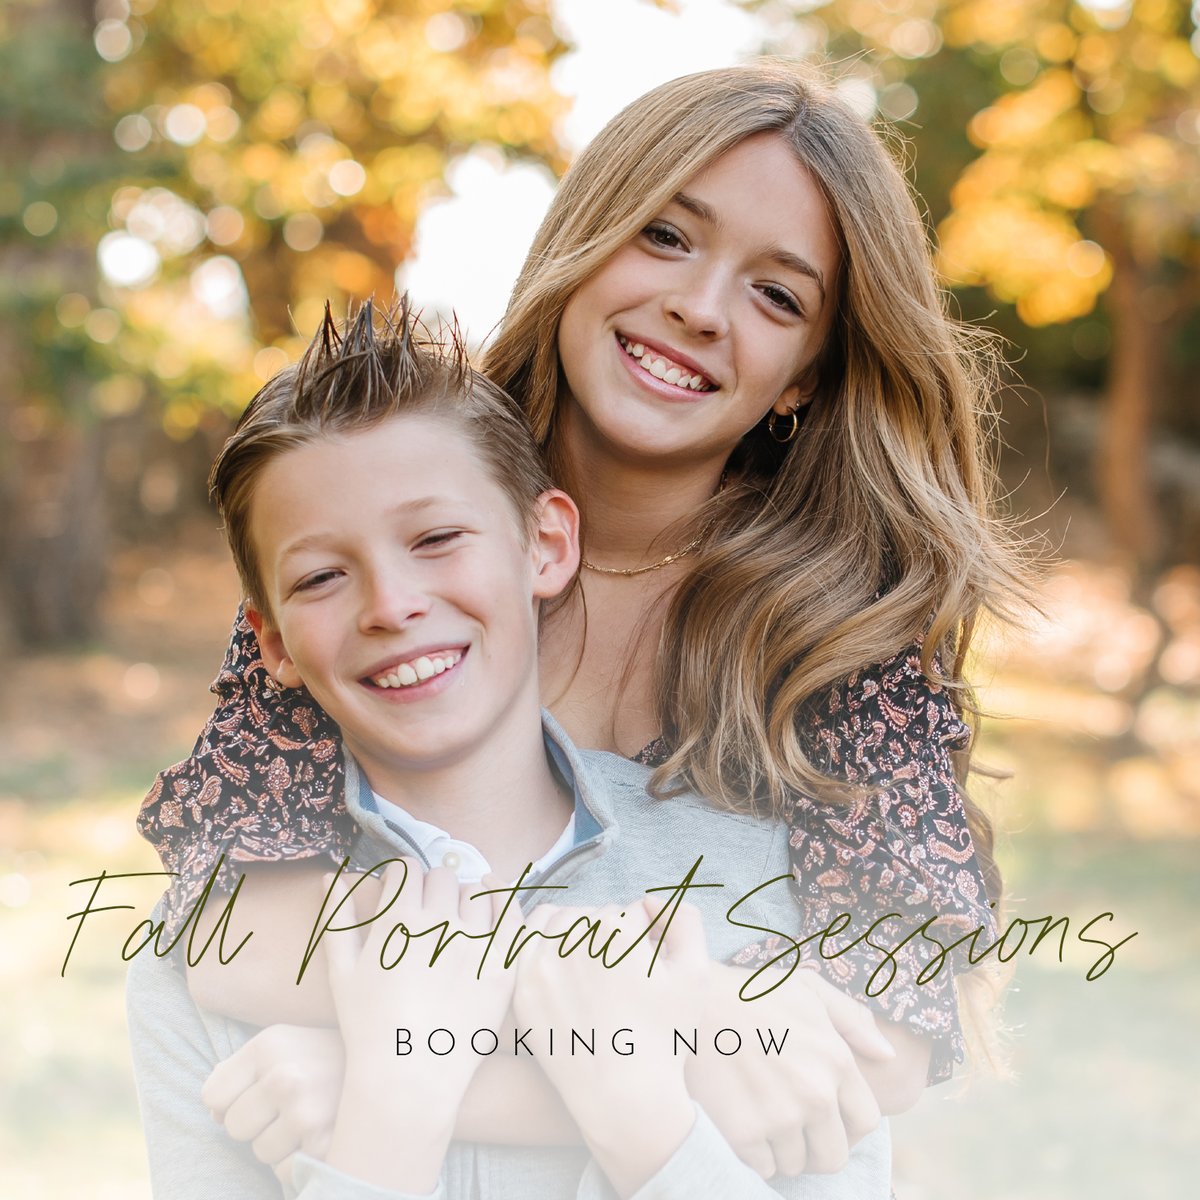 Image of Fall Portrait Sessions